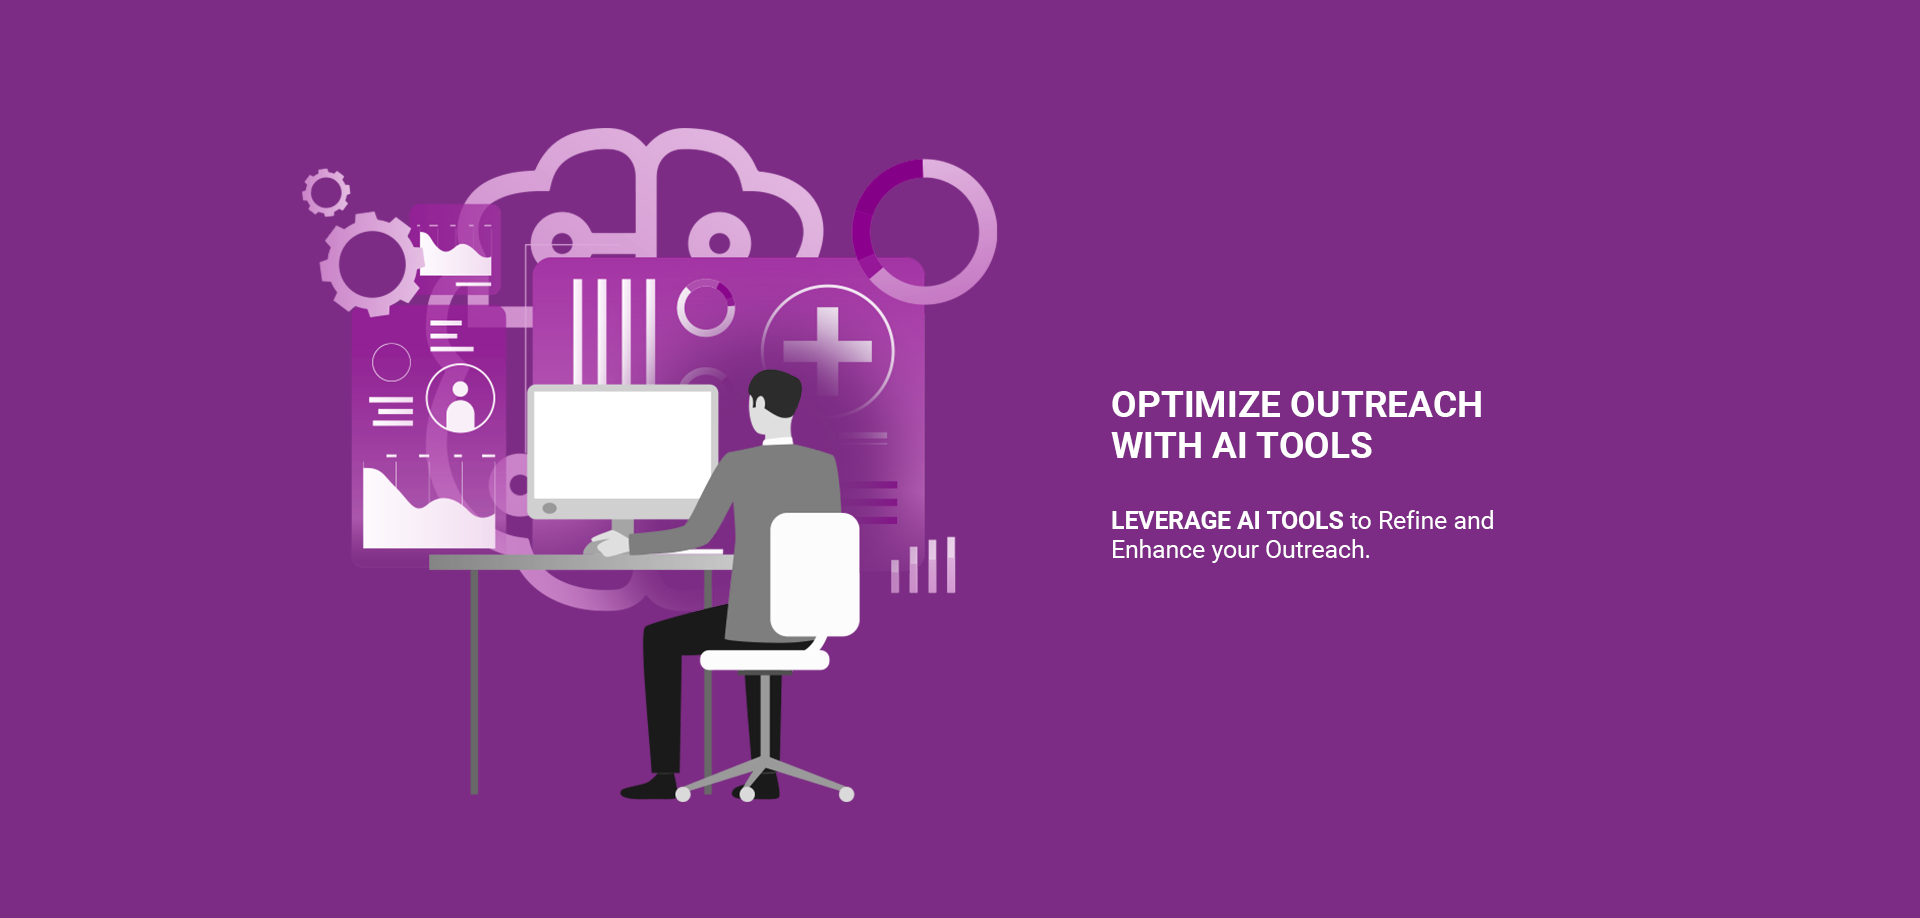 Illustration of a person at a computer desk surrounded by various AI and technology icons highlighting the text "OPTIMIZE OUTREACH WITH AI TOOLS".